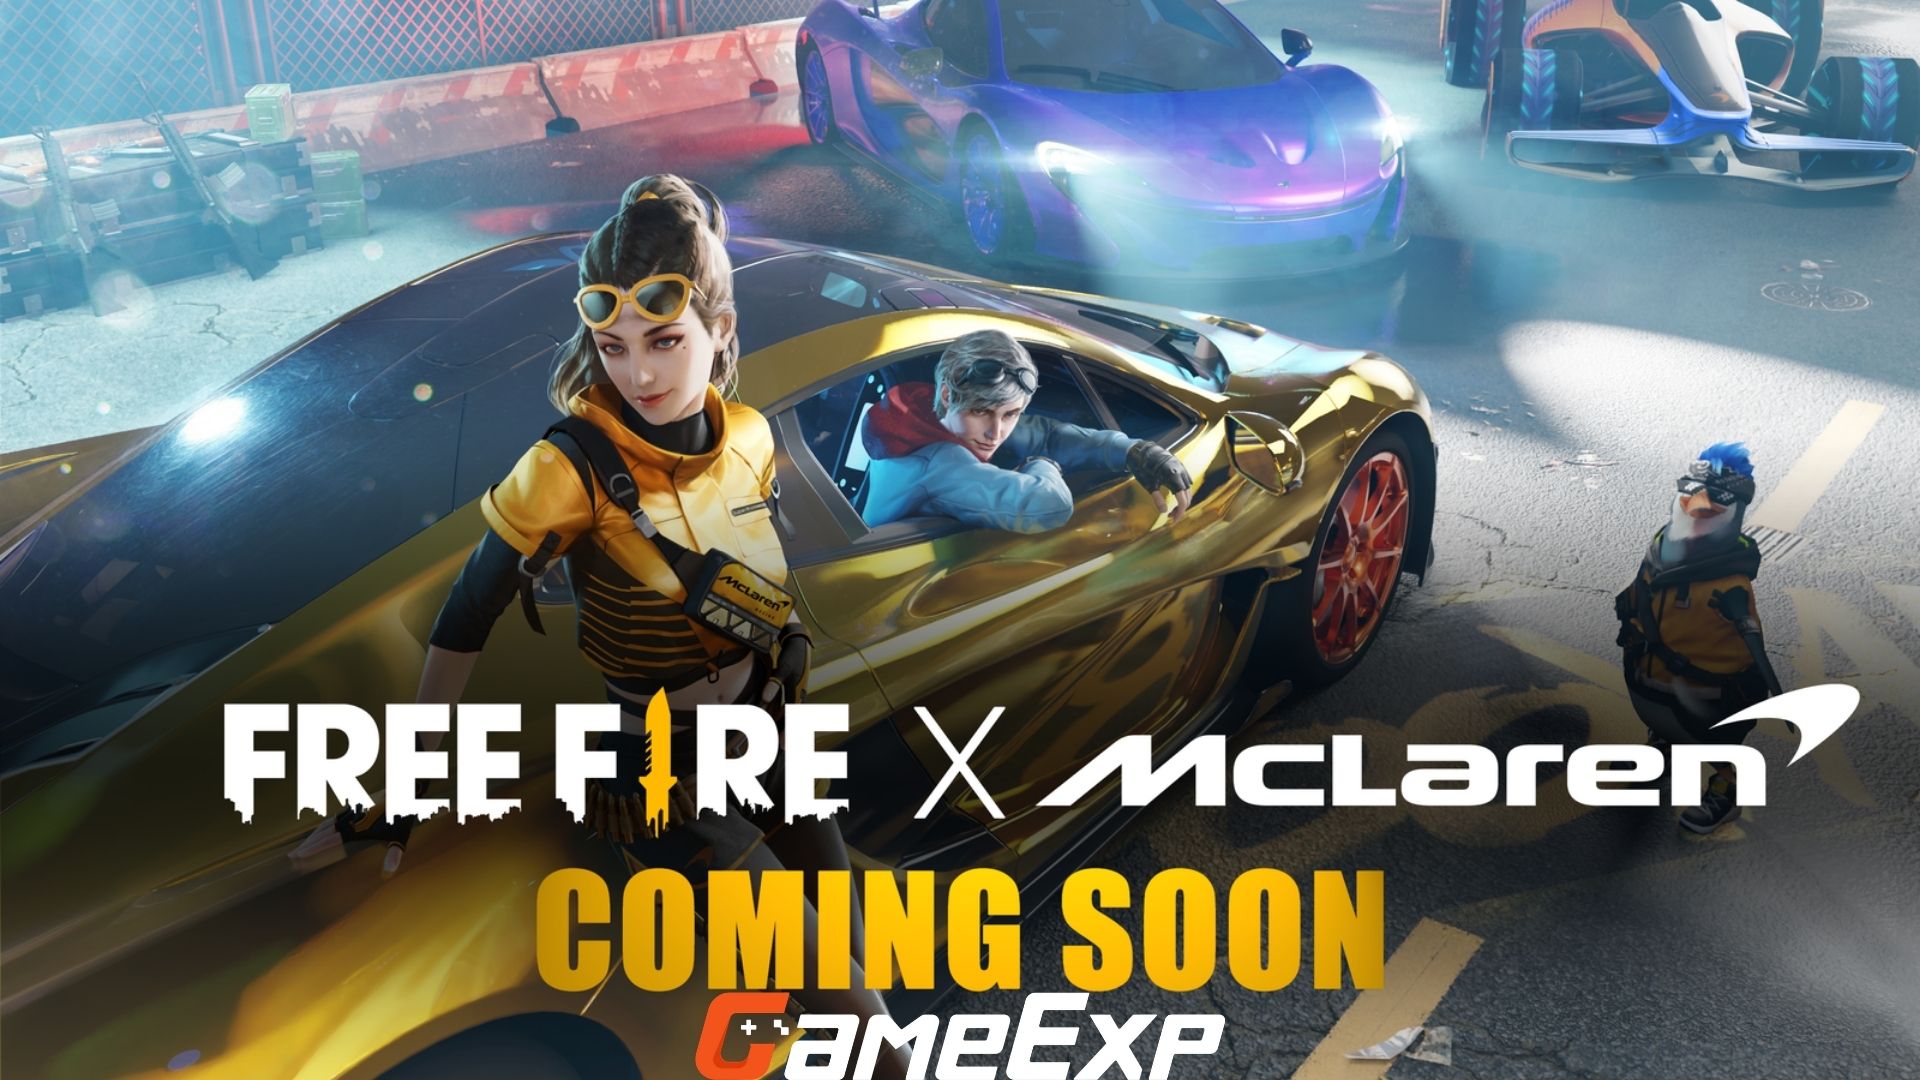 Upcoming Free Fire X Mclaren Racing Collab Will Feature The Mclaren P1 And Mclff Exclusive Race Car